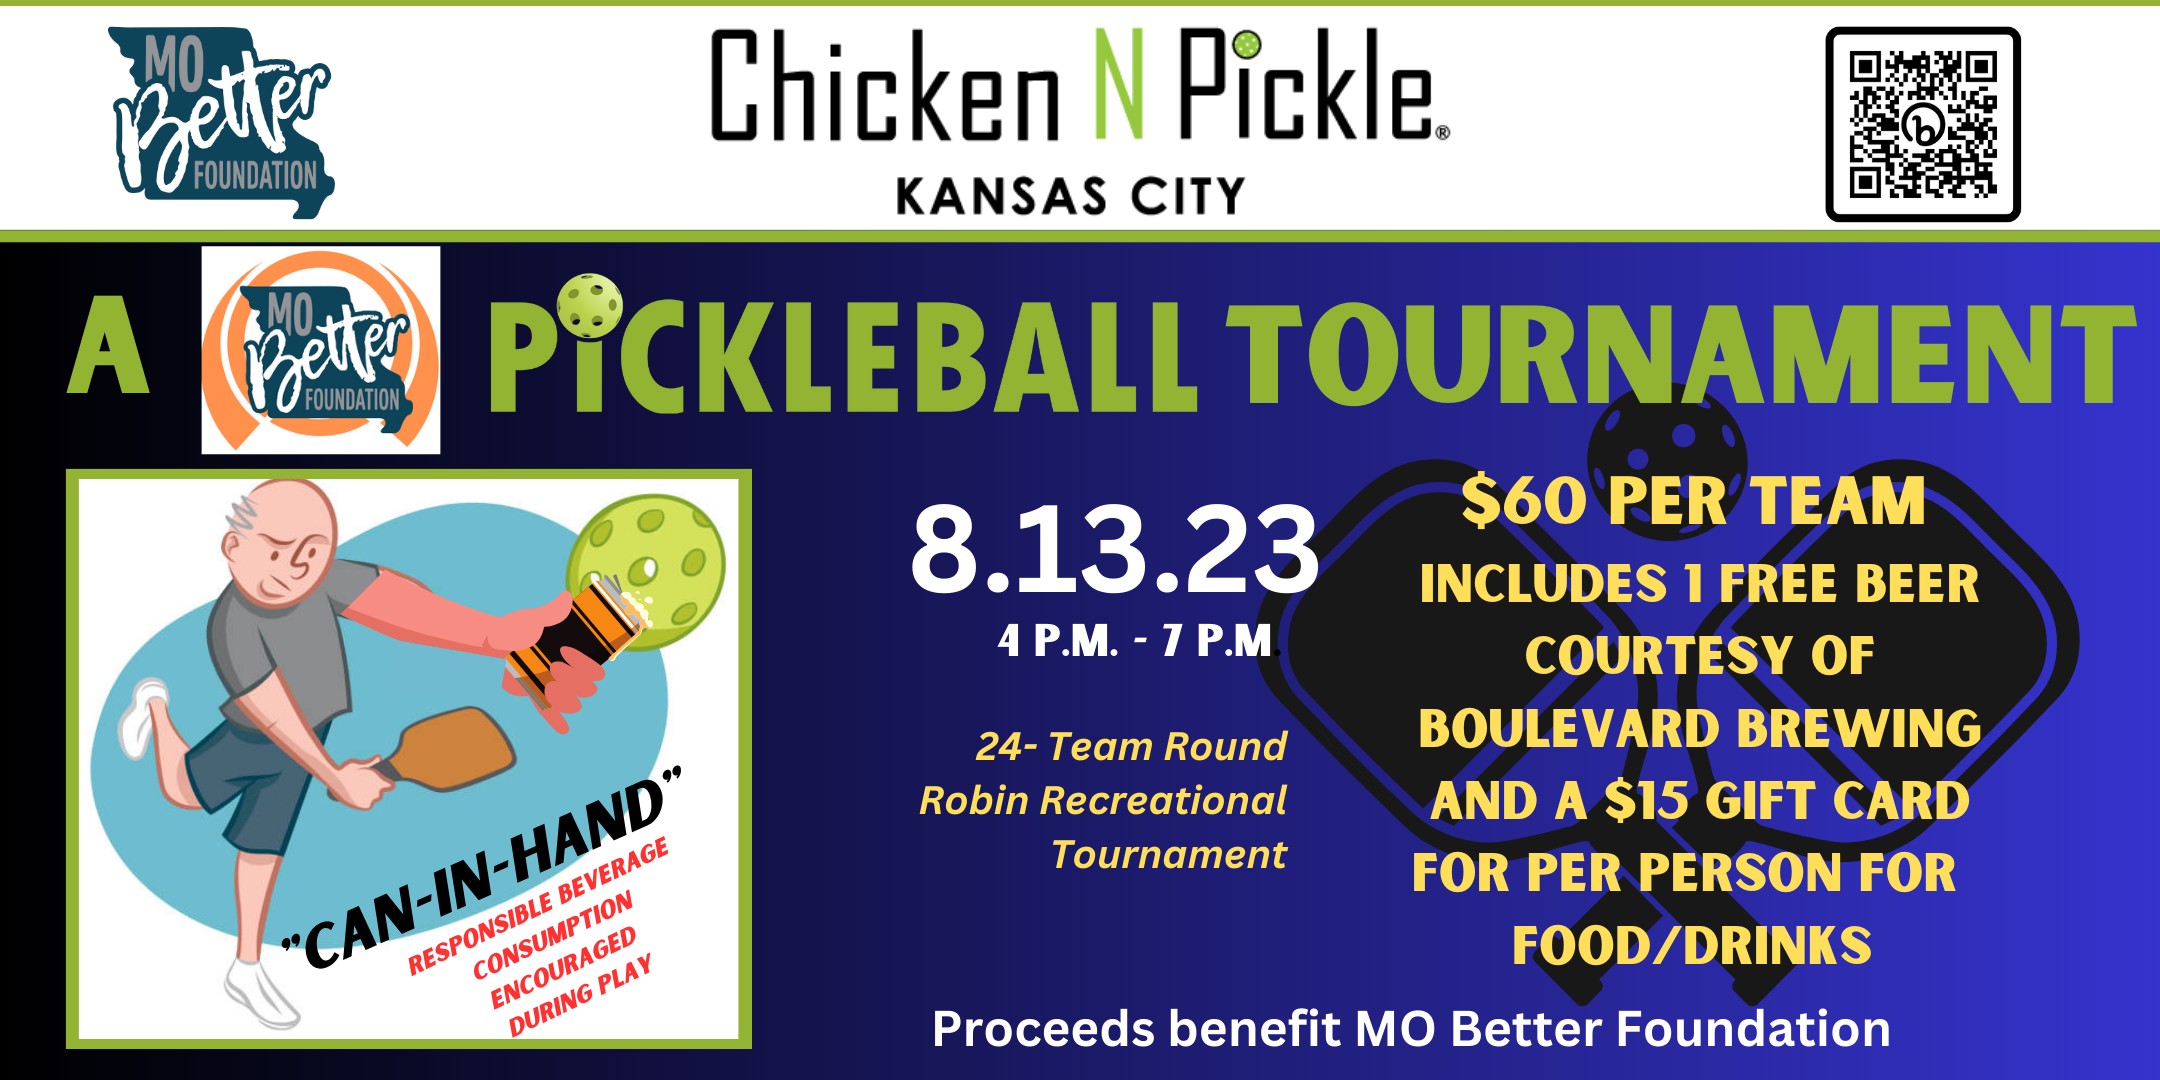 PICKLEBALL-TOURNAMENT-2160-×-1080-px.png